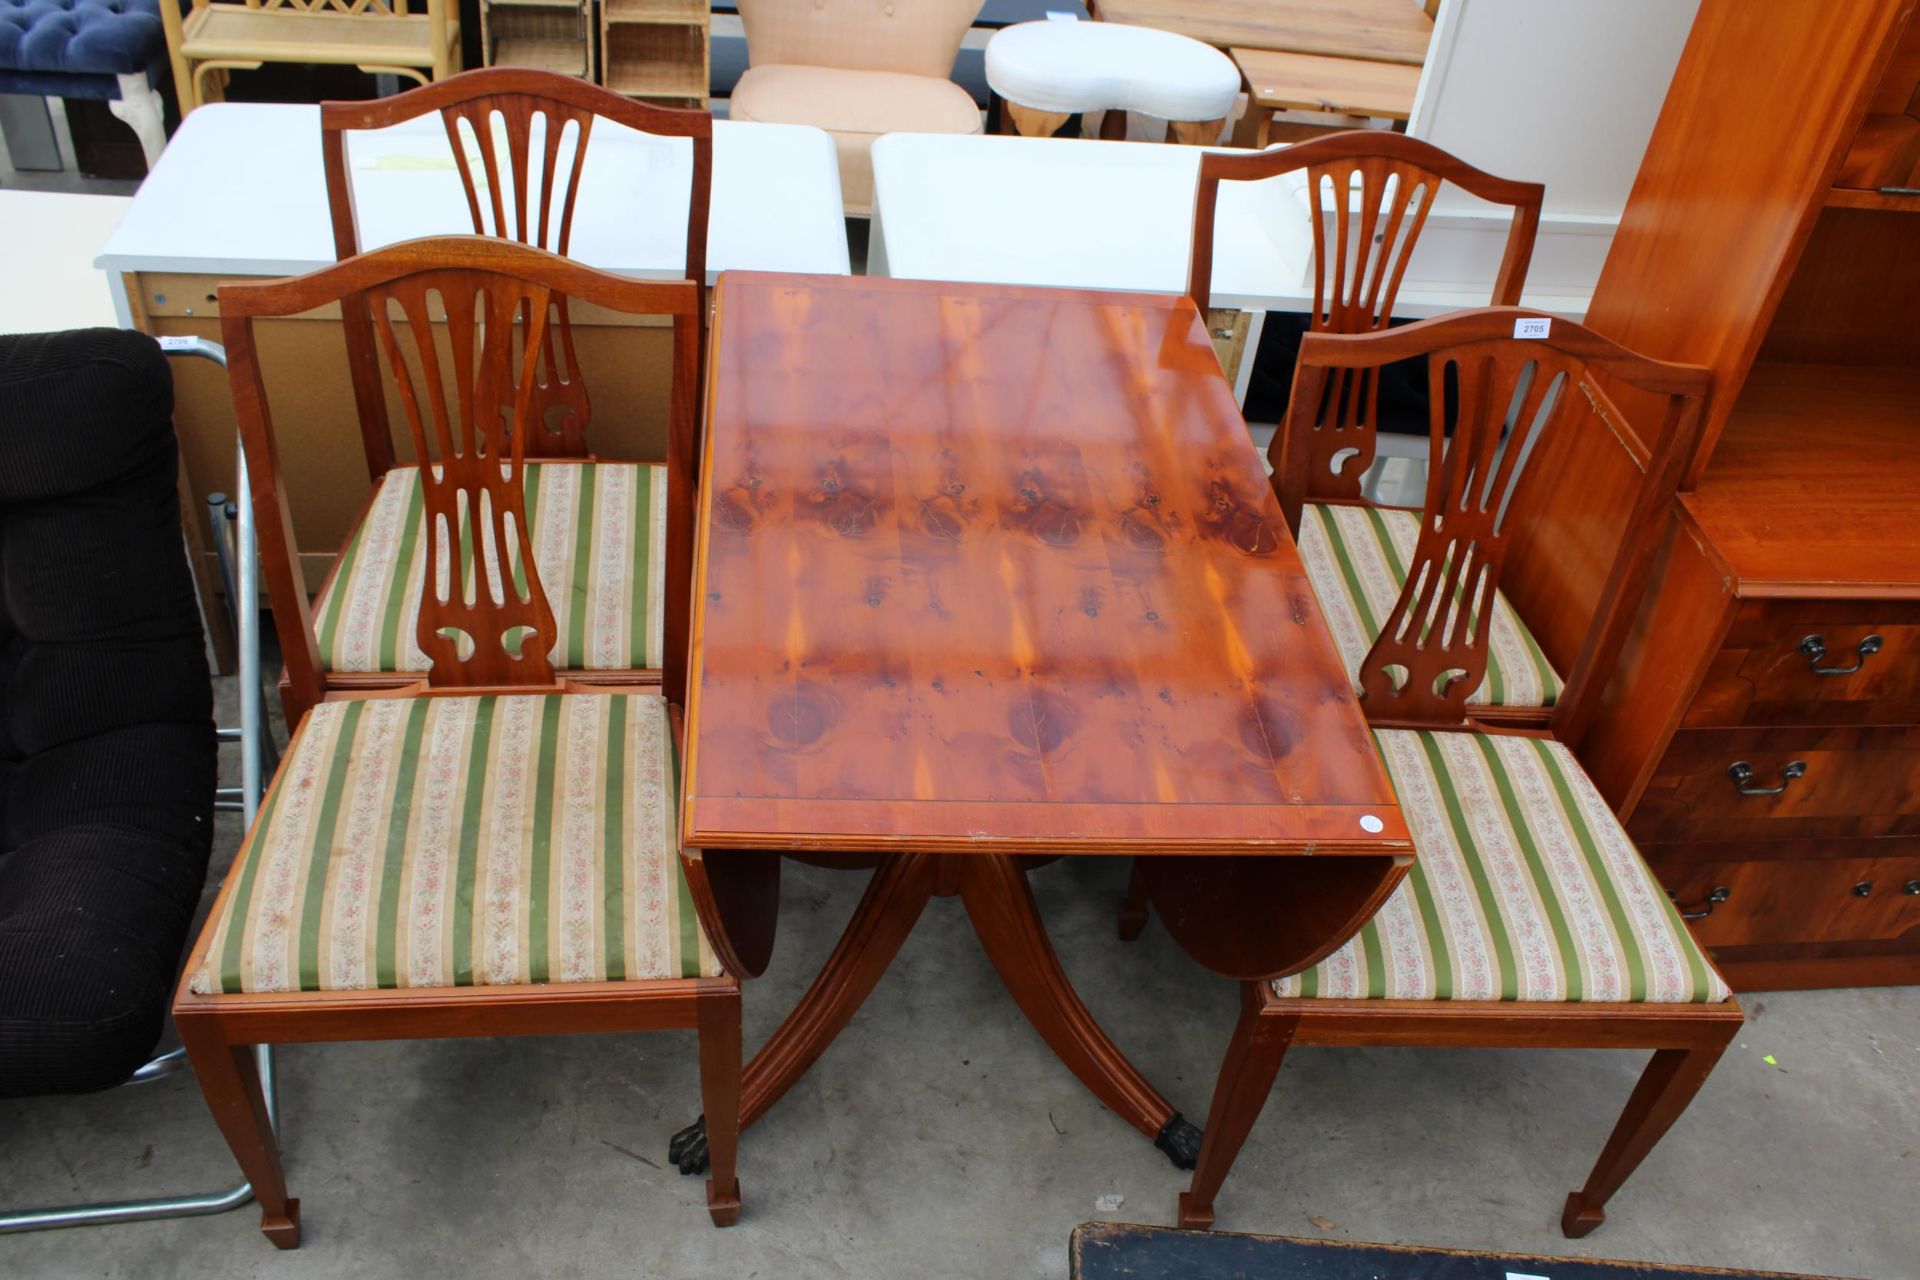 A MODERN YEW WOOD PEDESTAL DROP-LEAF DINING TABLE AND FOUR MATCHING CHAIRS